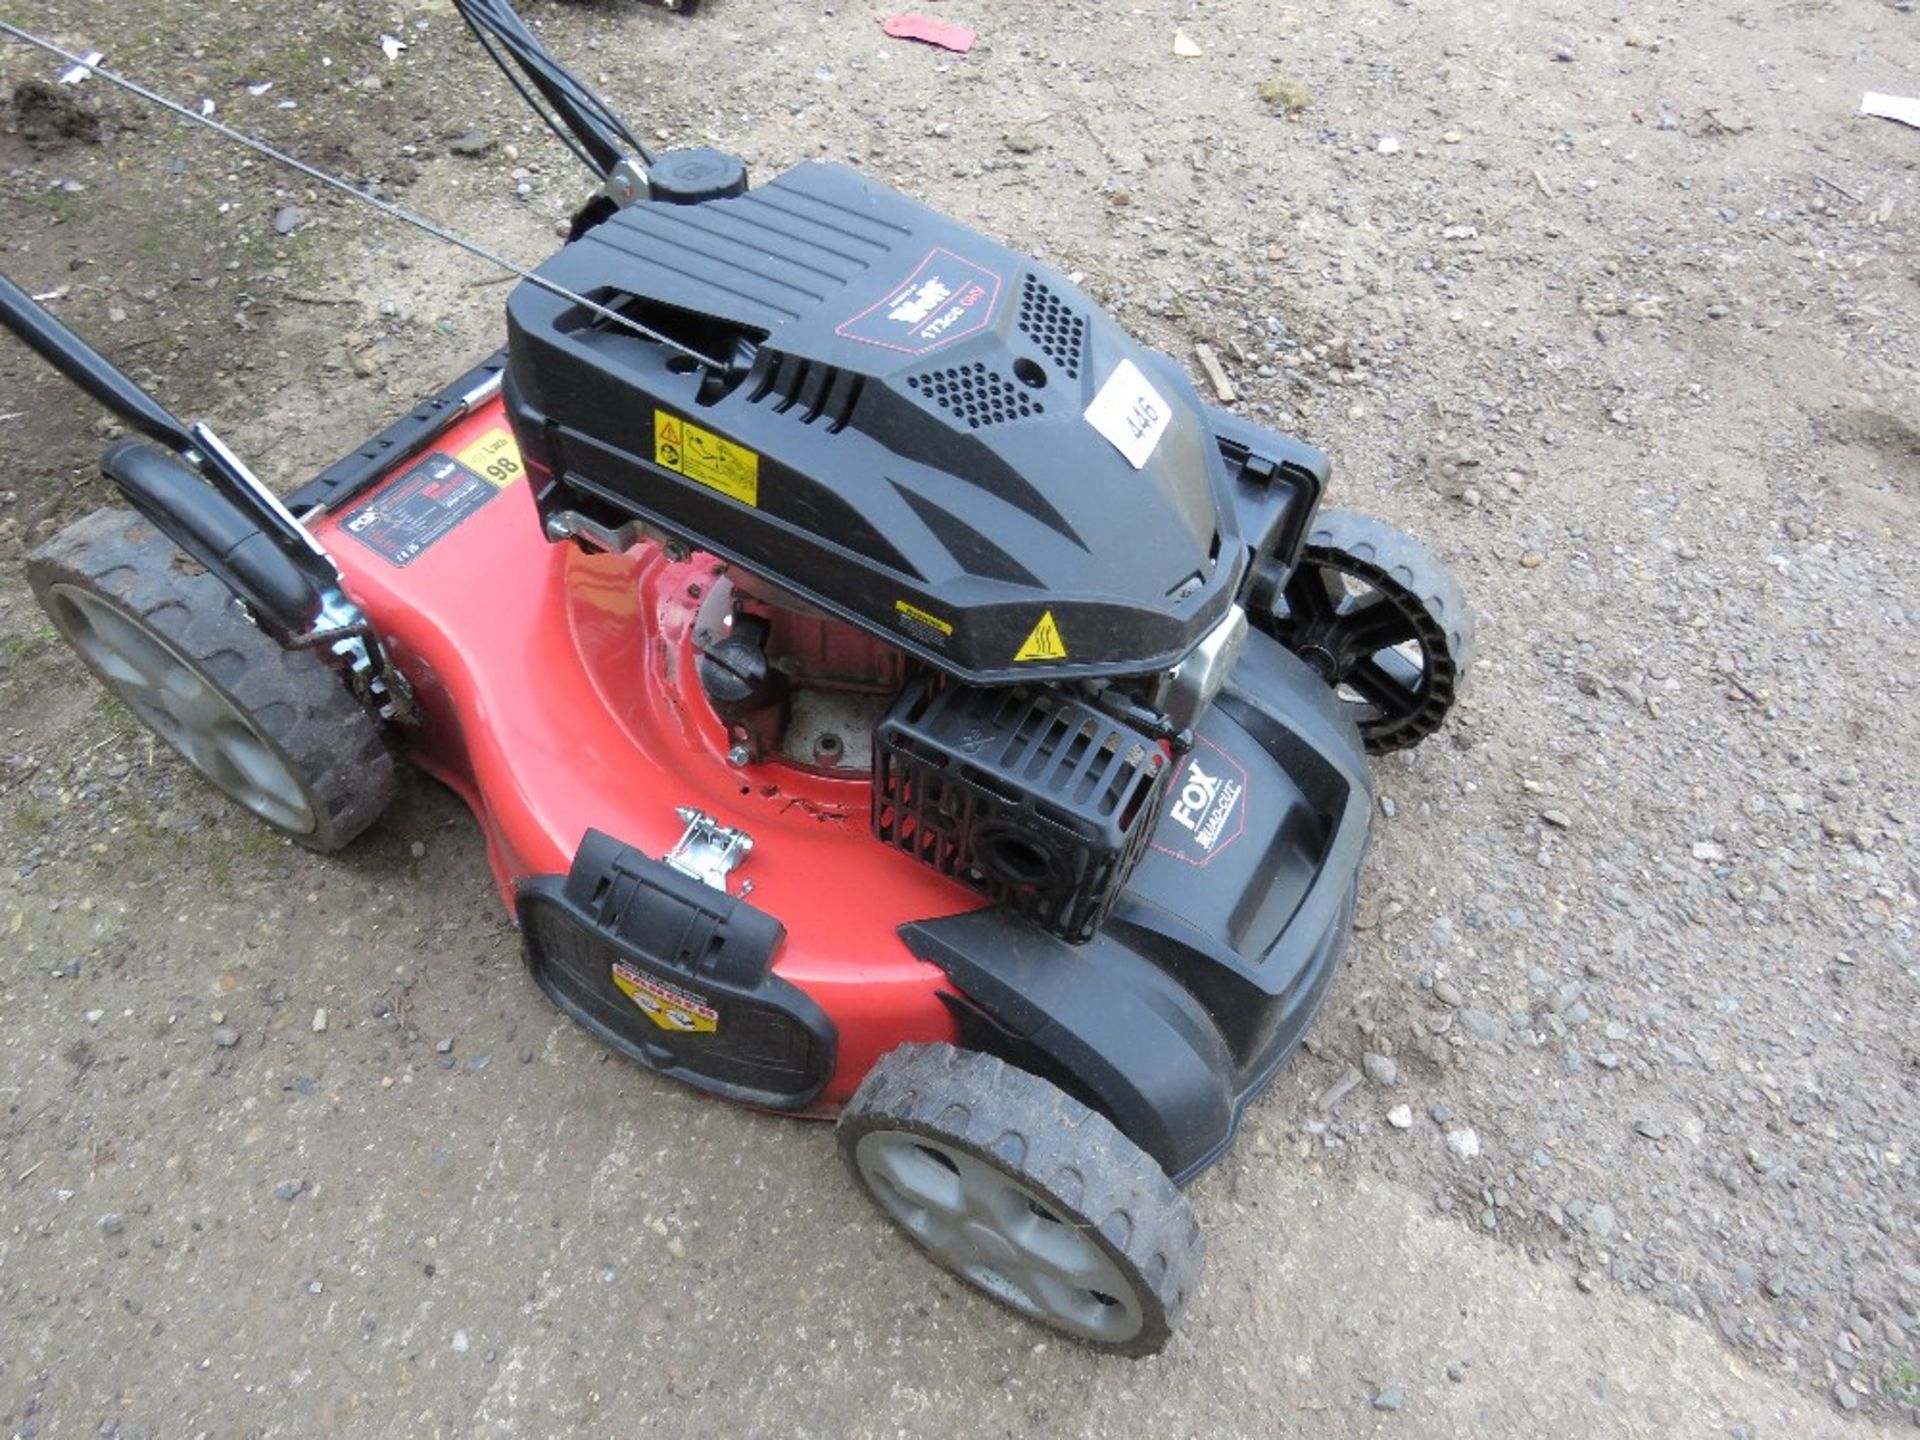 FOX QUAD CUT PETROL ENGINED MOWER WITH NO COLLECTOR. ....THIS LOT IS SOLD UNDER THE AUCTIONEERS MARG - Image 3 of 4